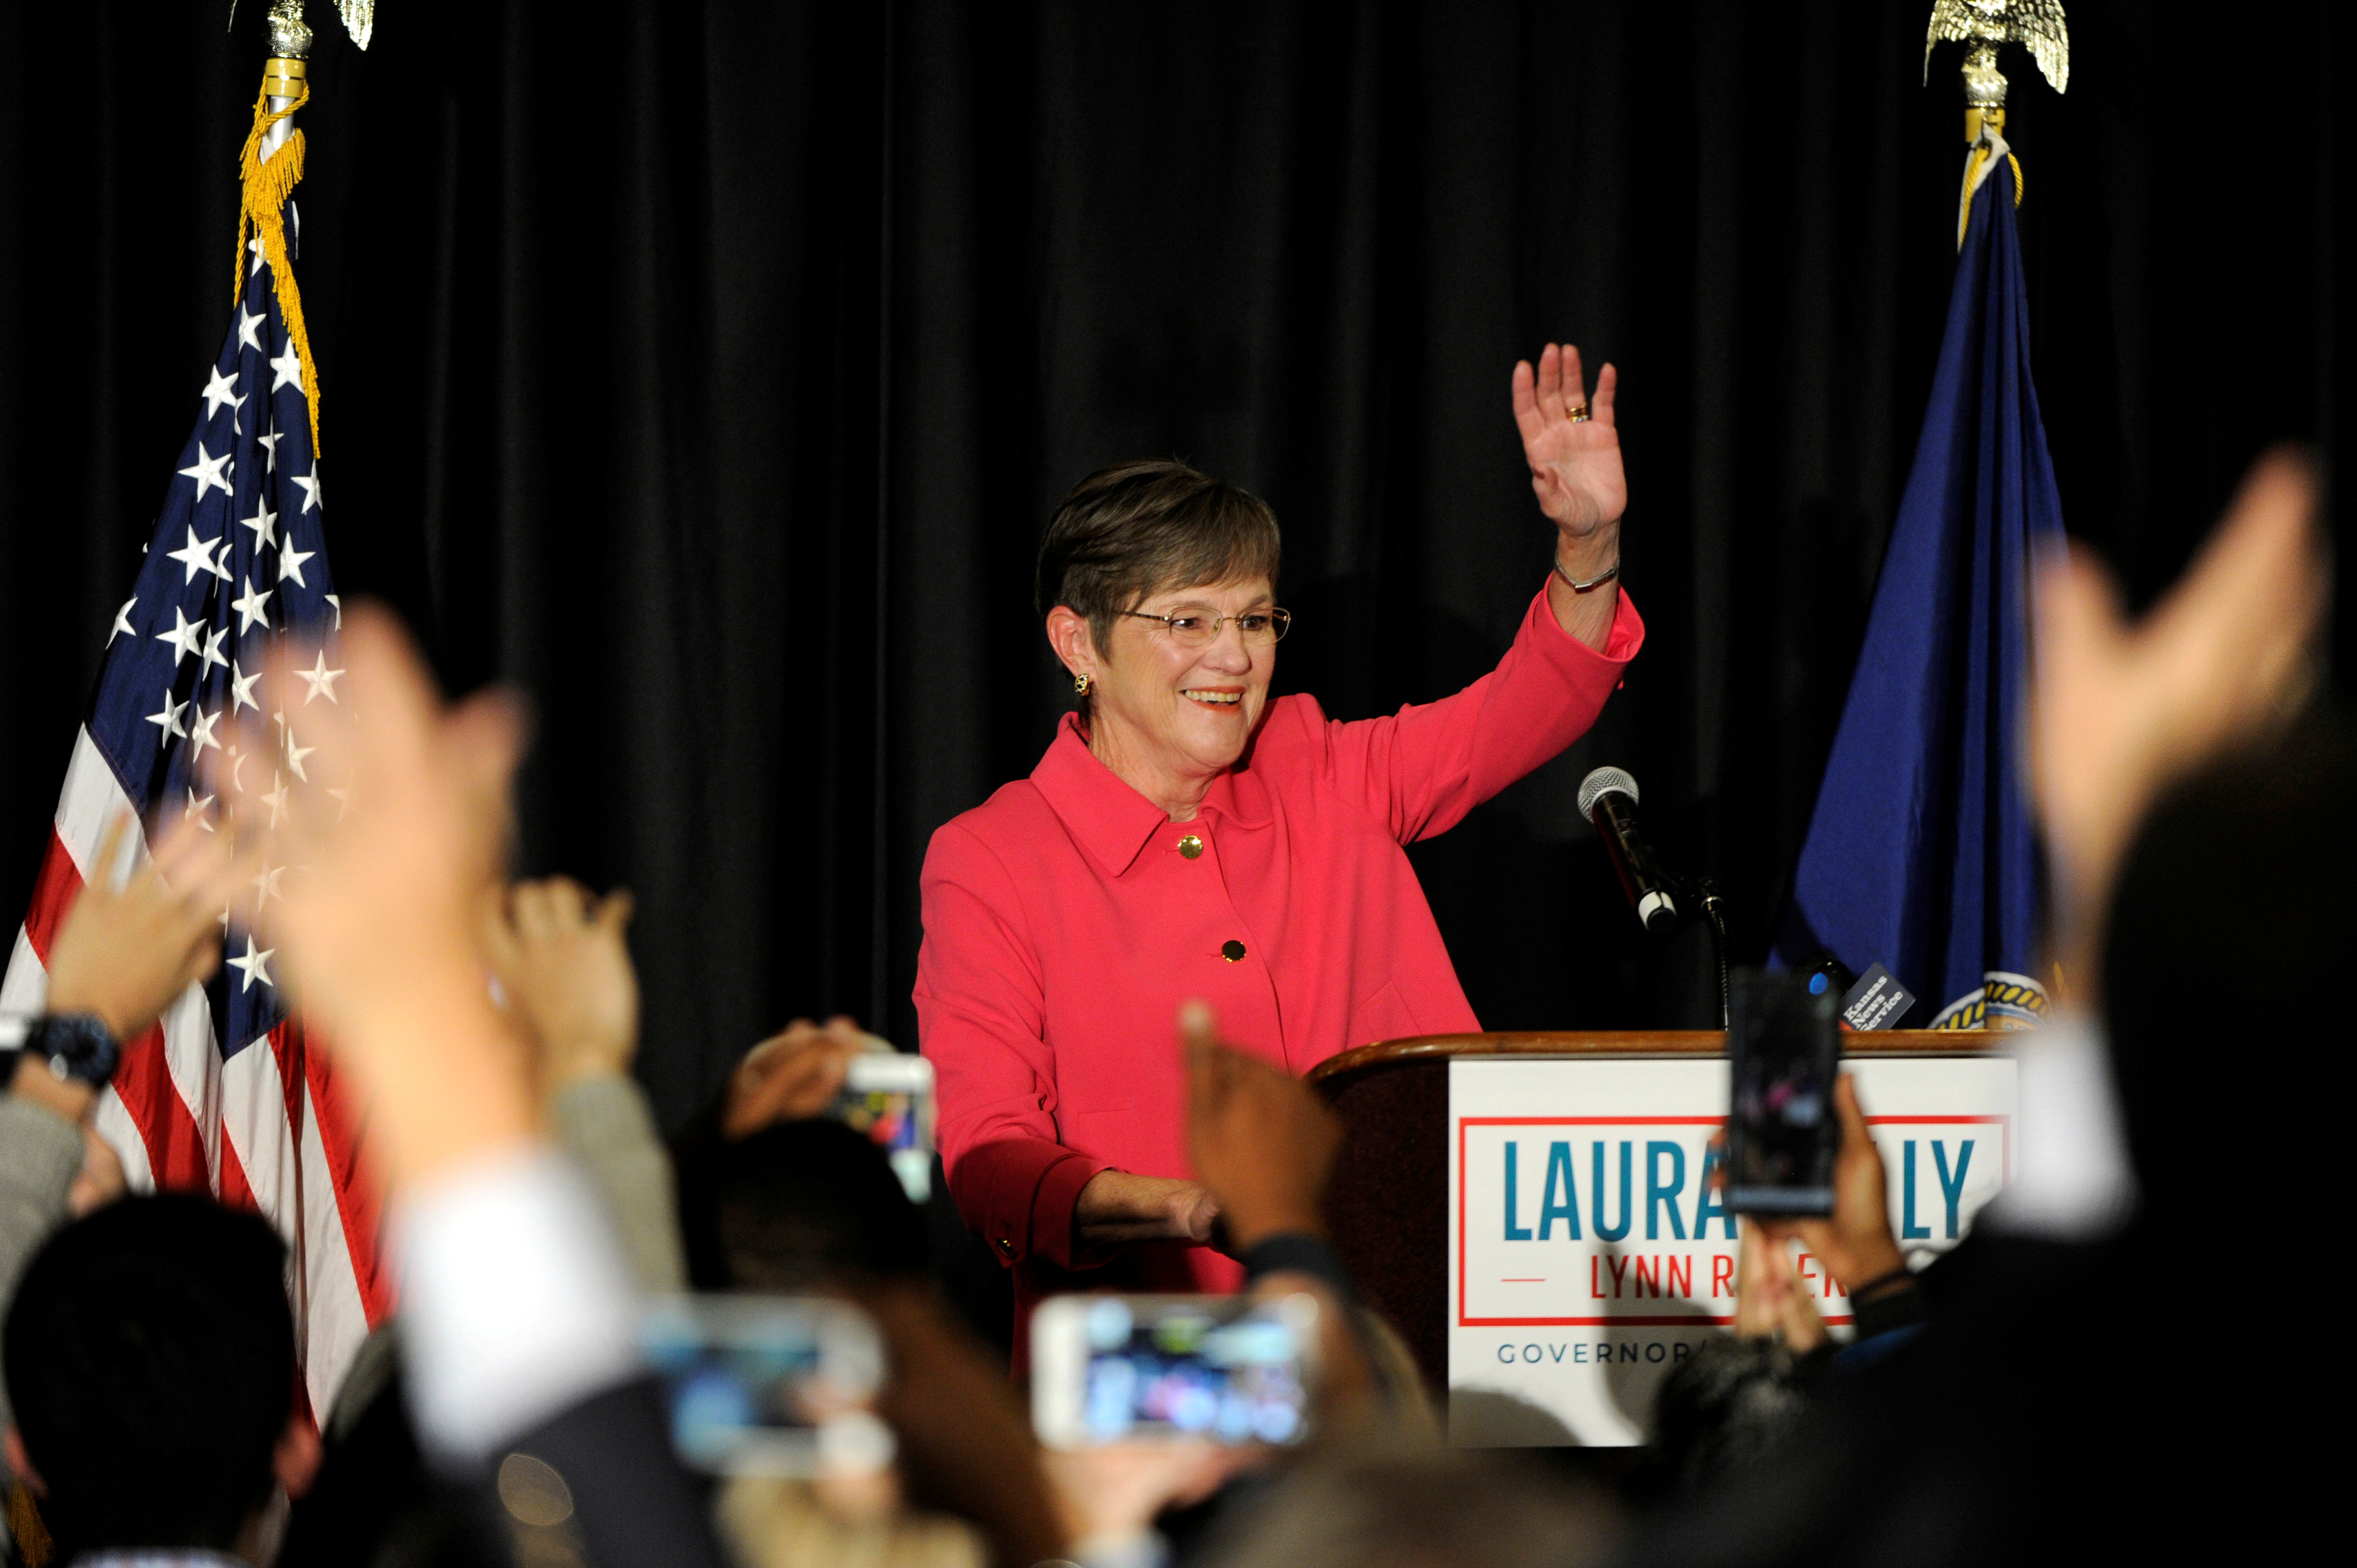 Democrat Laura Kelly talks to her supporters after winning the governor's race at her election night party in Topeka, Kansas, U.S. November 6, 2018. REUTERS/Dave Kaup 